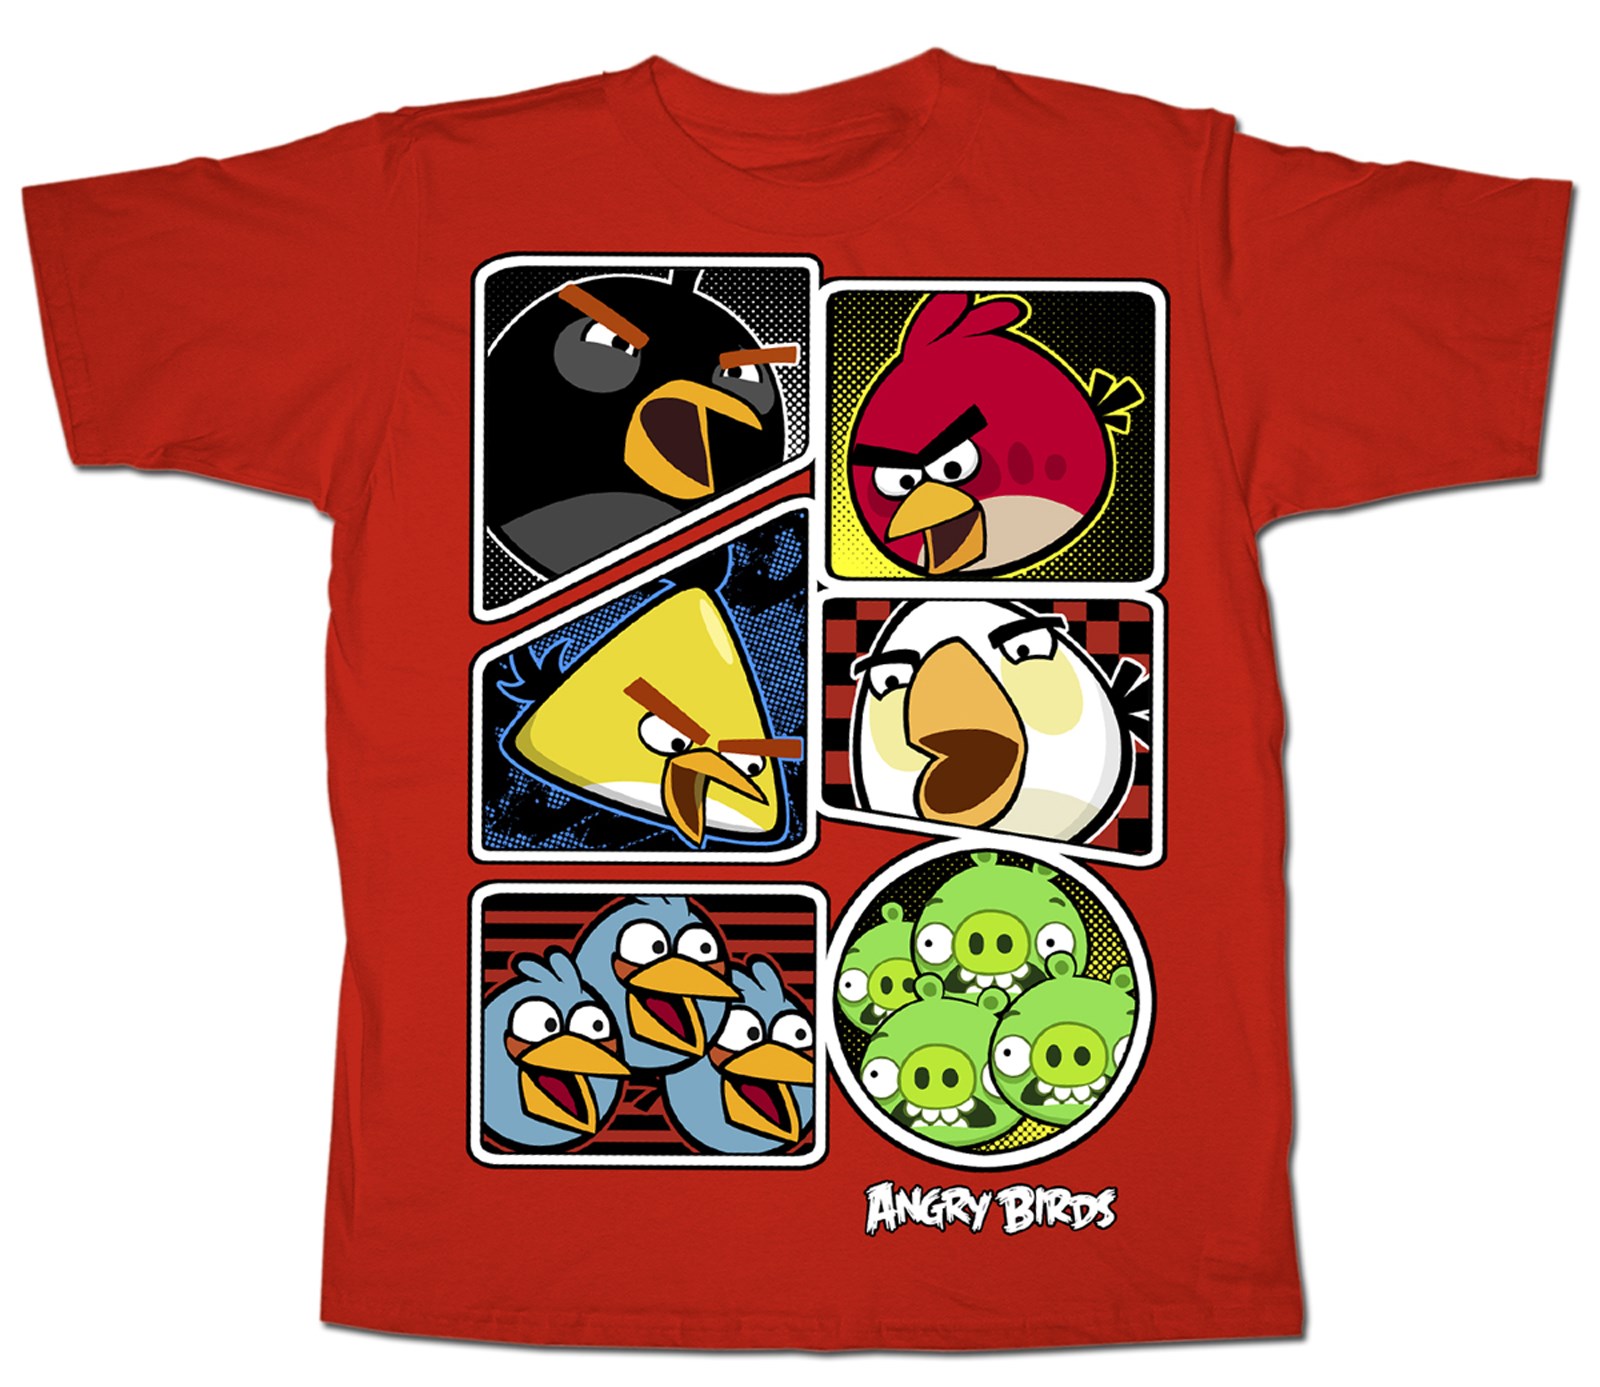 Get Them Red Angry Birds T-Shirt